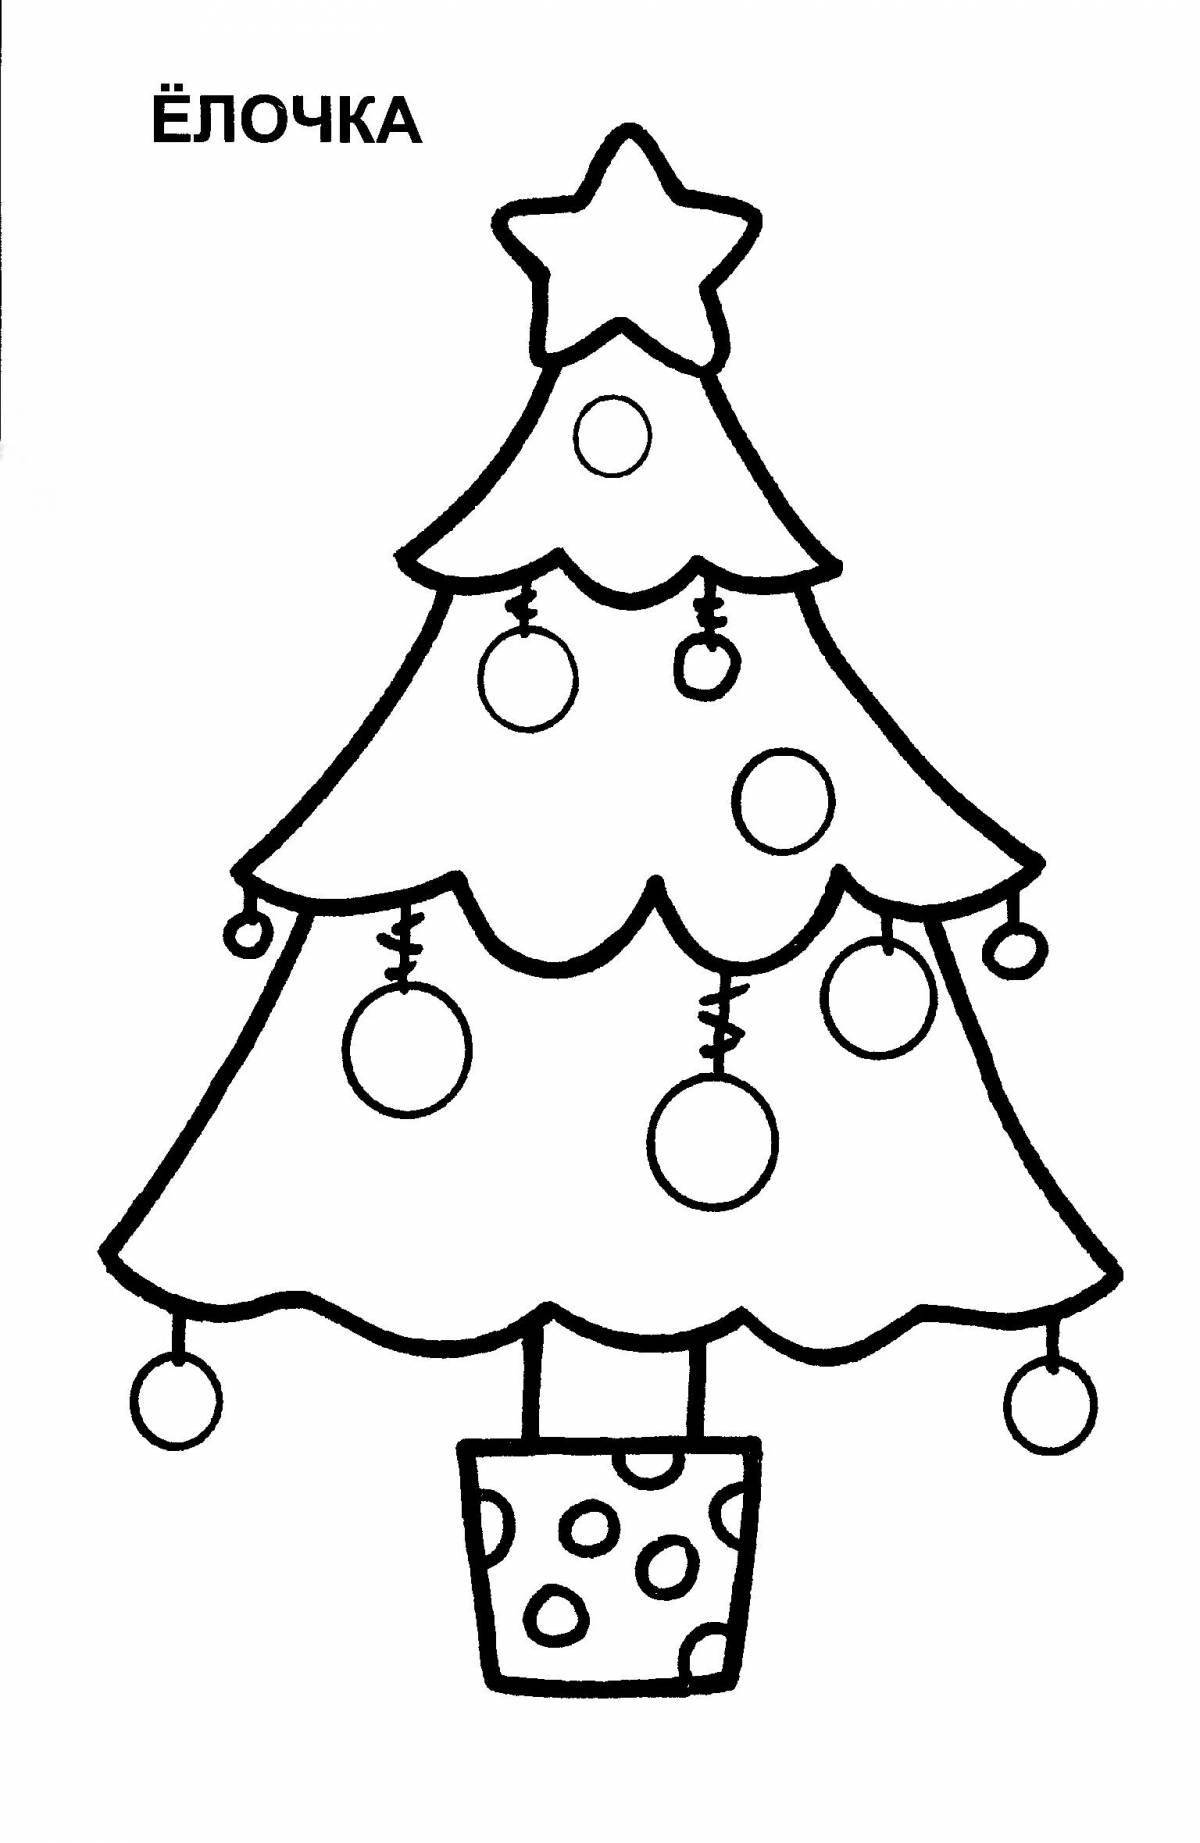 Glowing Christmas tree coloring book for kids